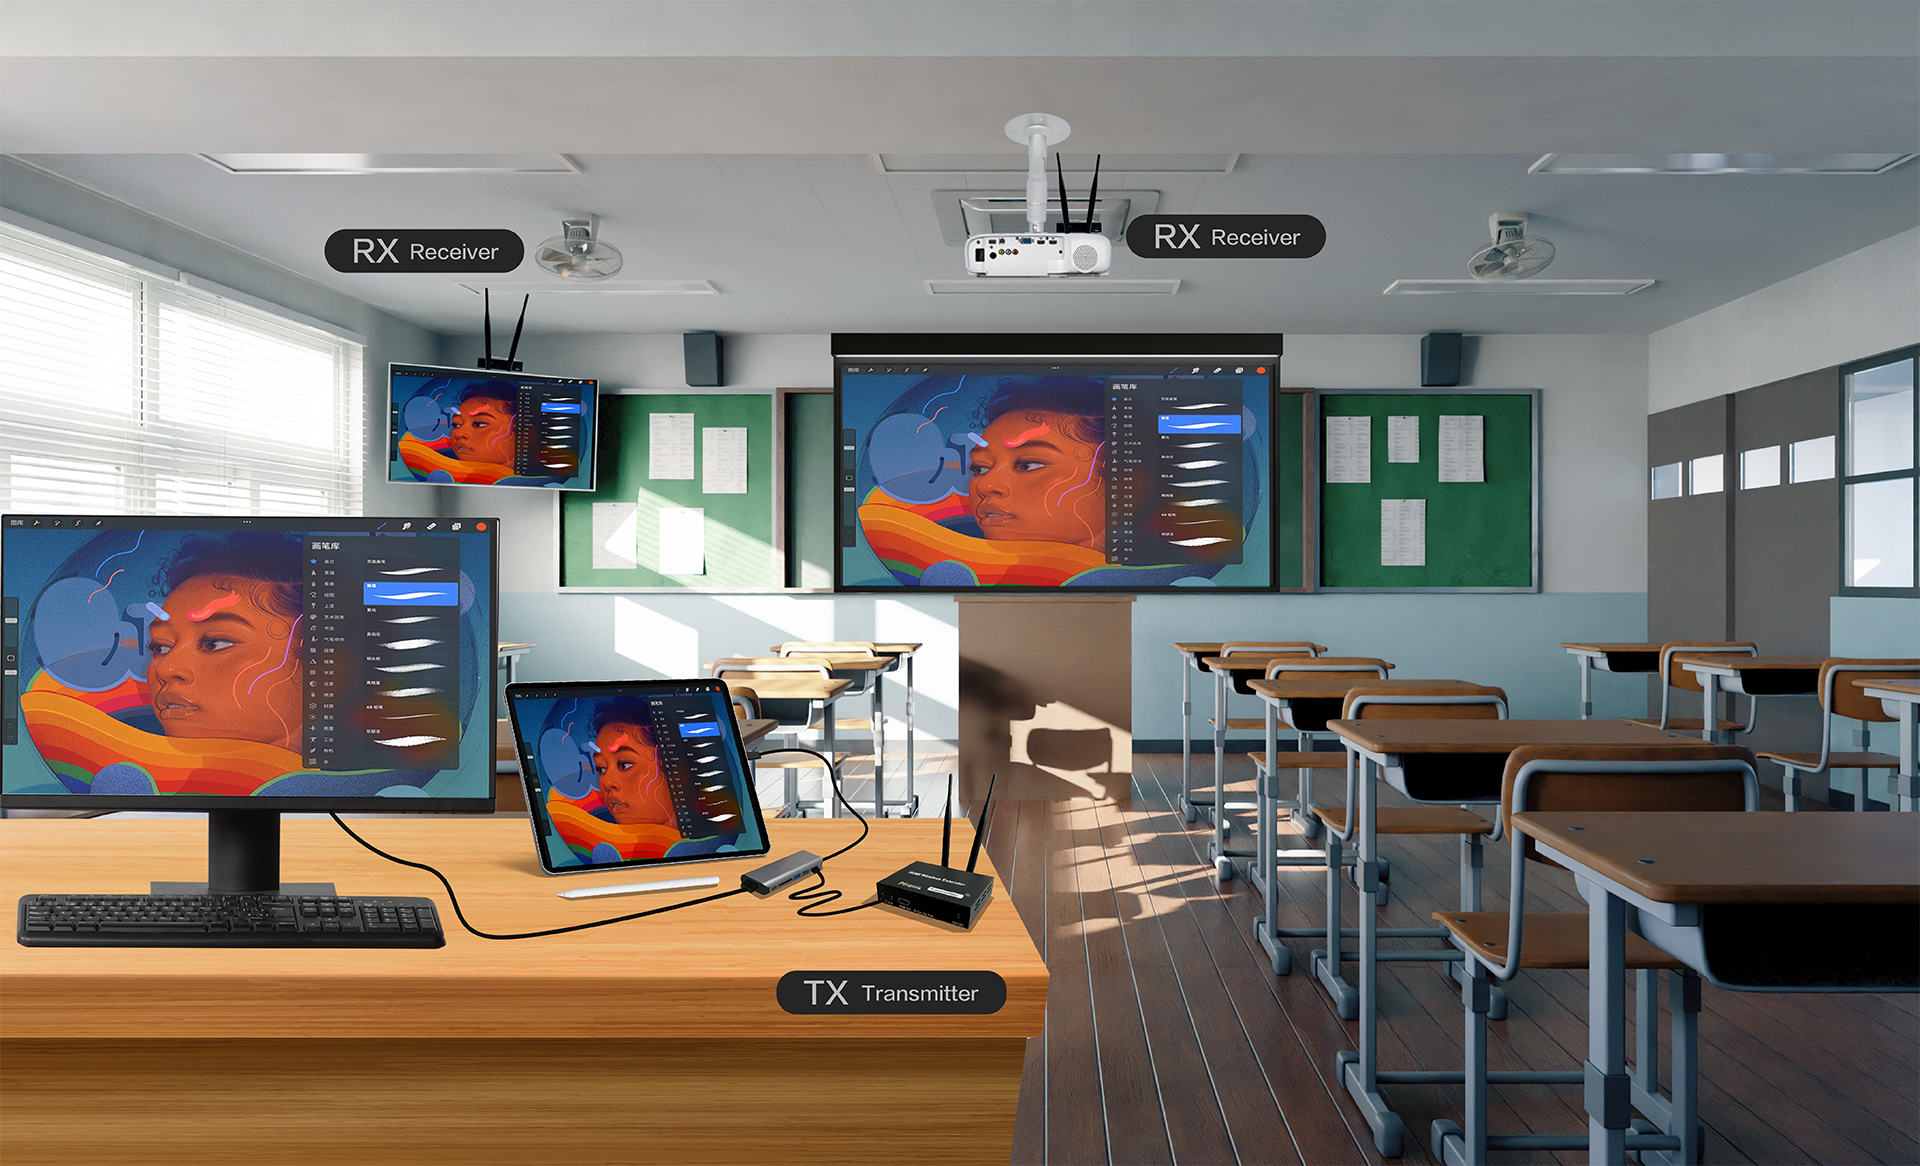 The usage scenarios of Nugens HDMI Wireless Extender in classroom desktop, iPad and projector, and large screen synchronous projection